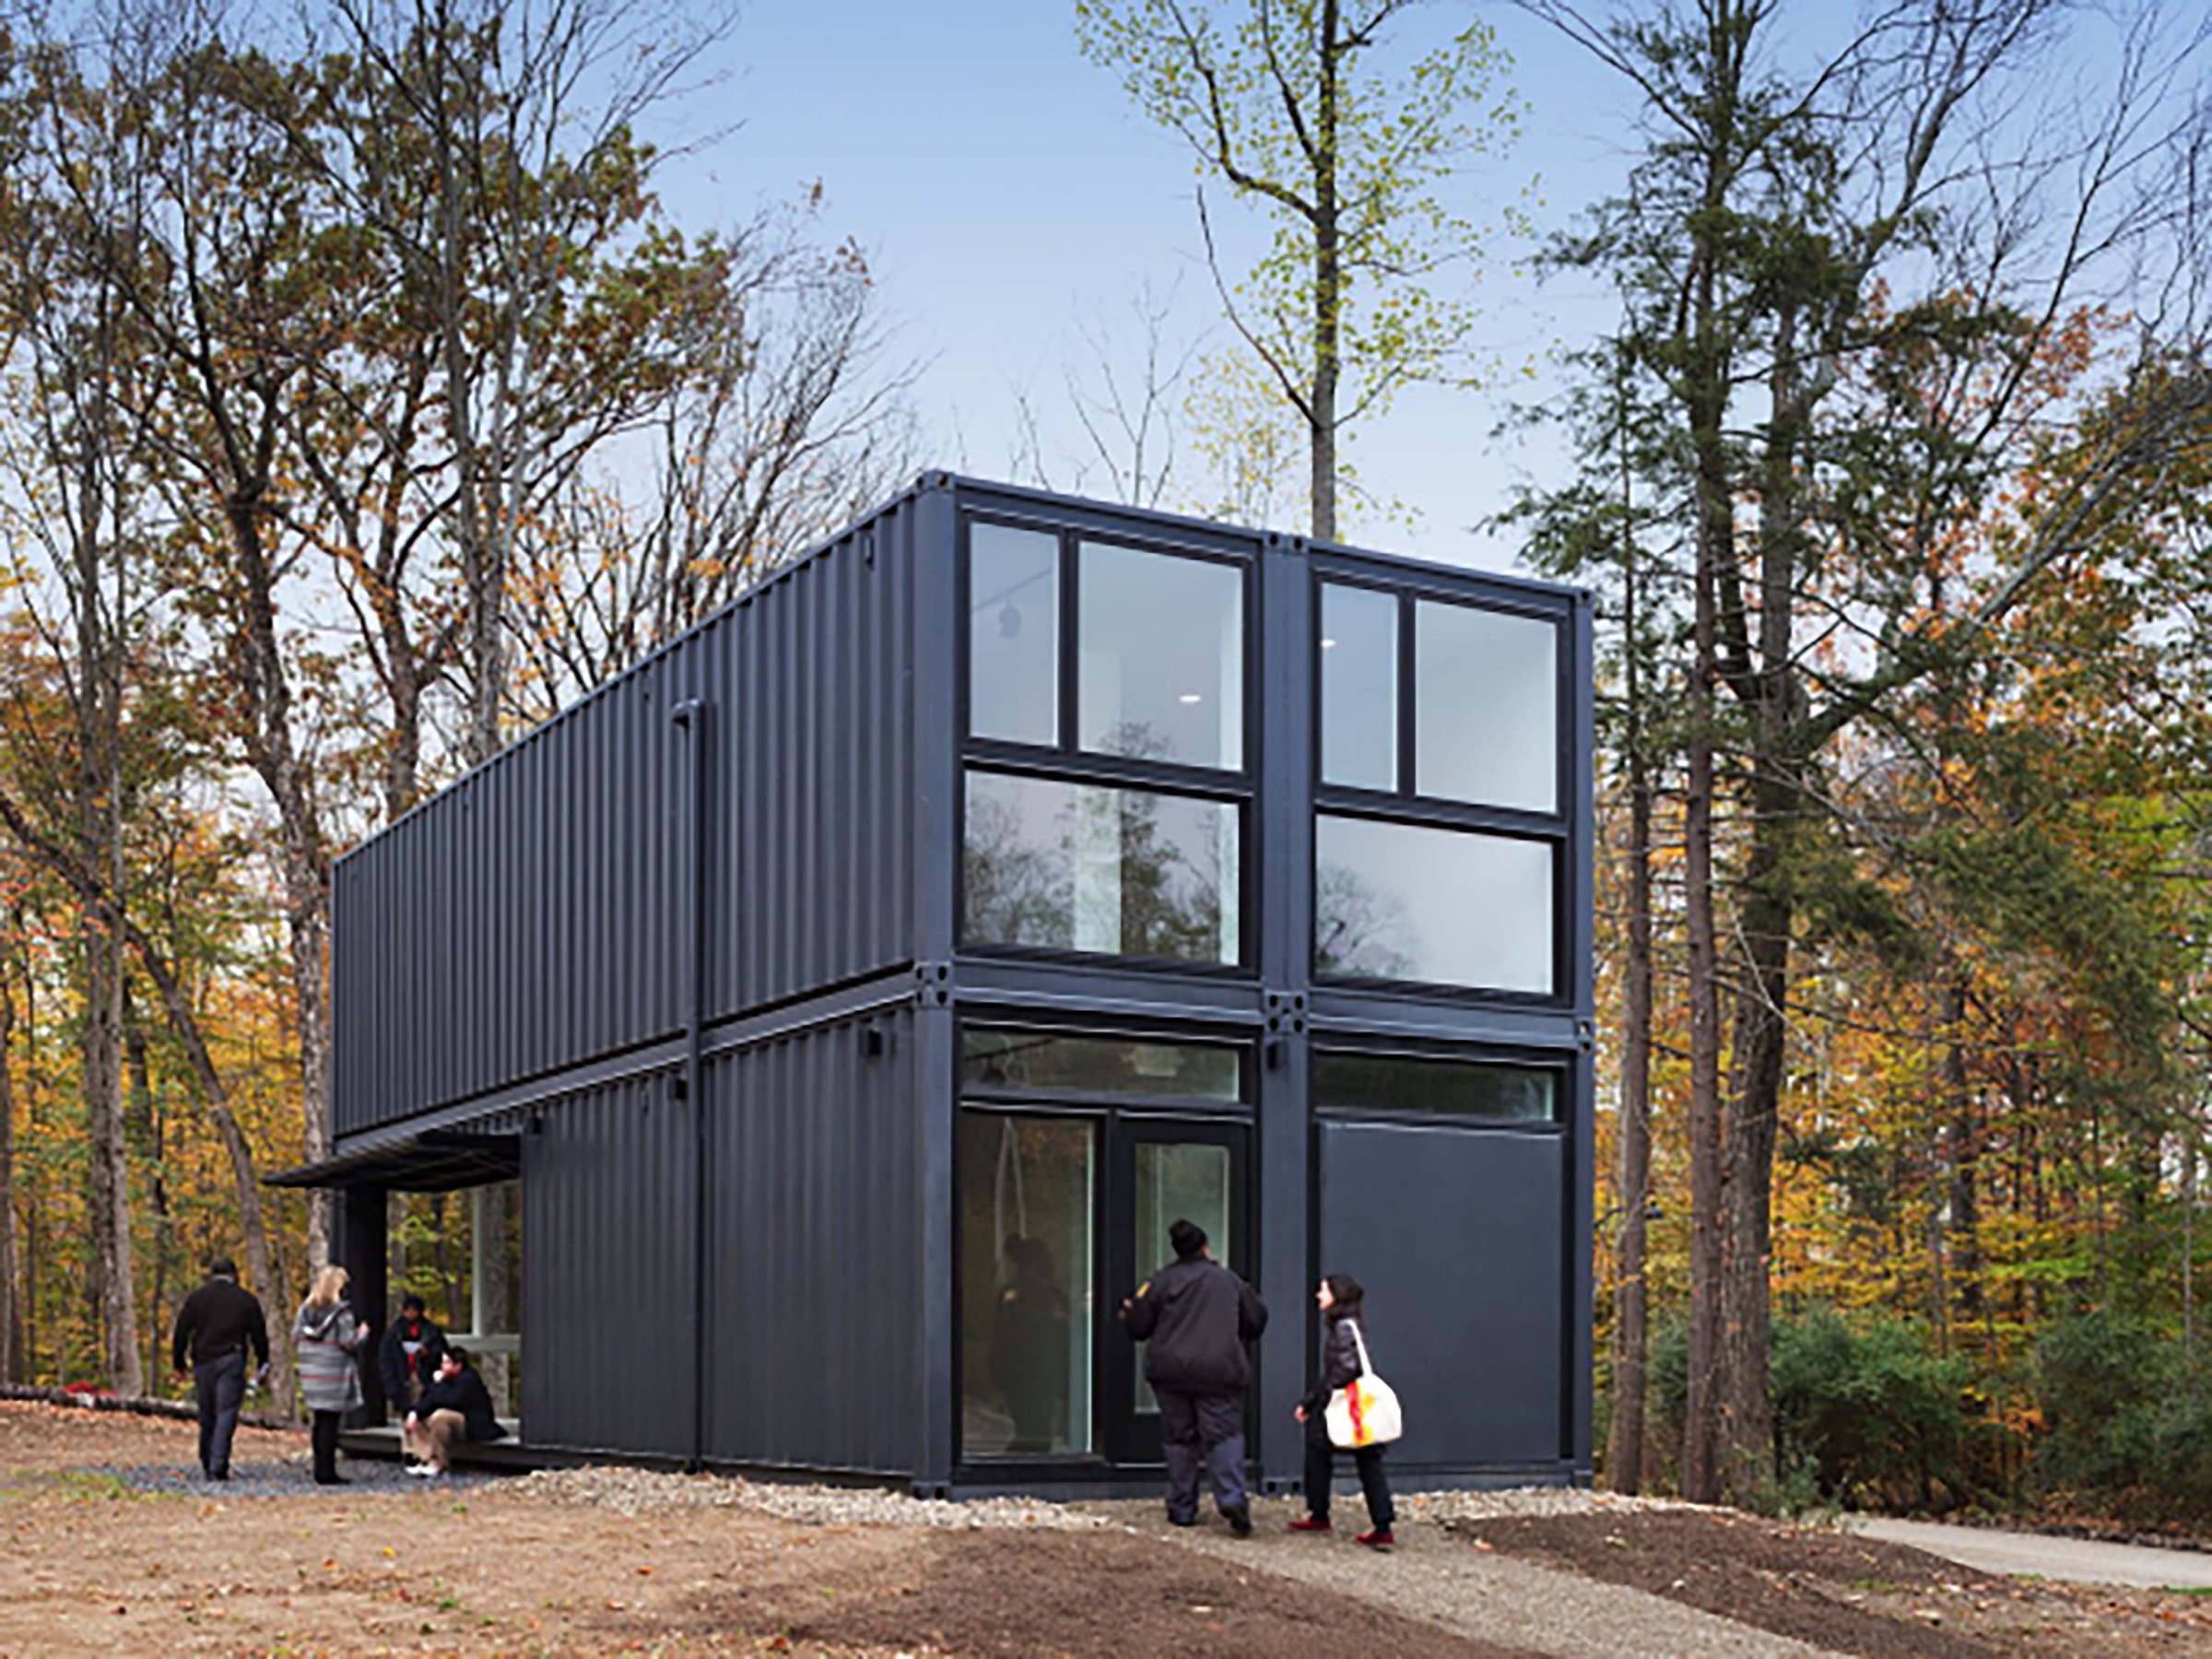 Black revamped, modern shipping container in forest with people around